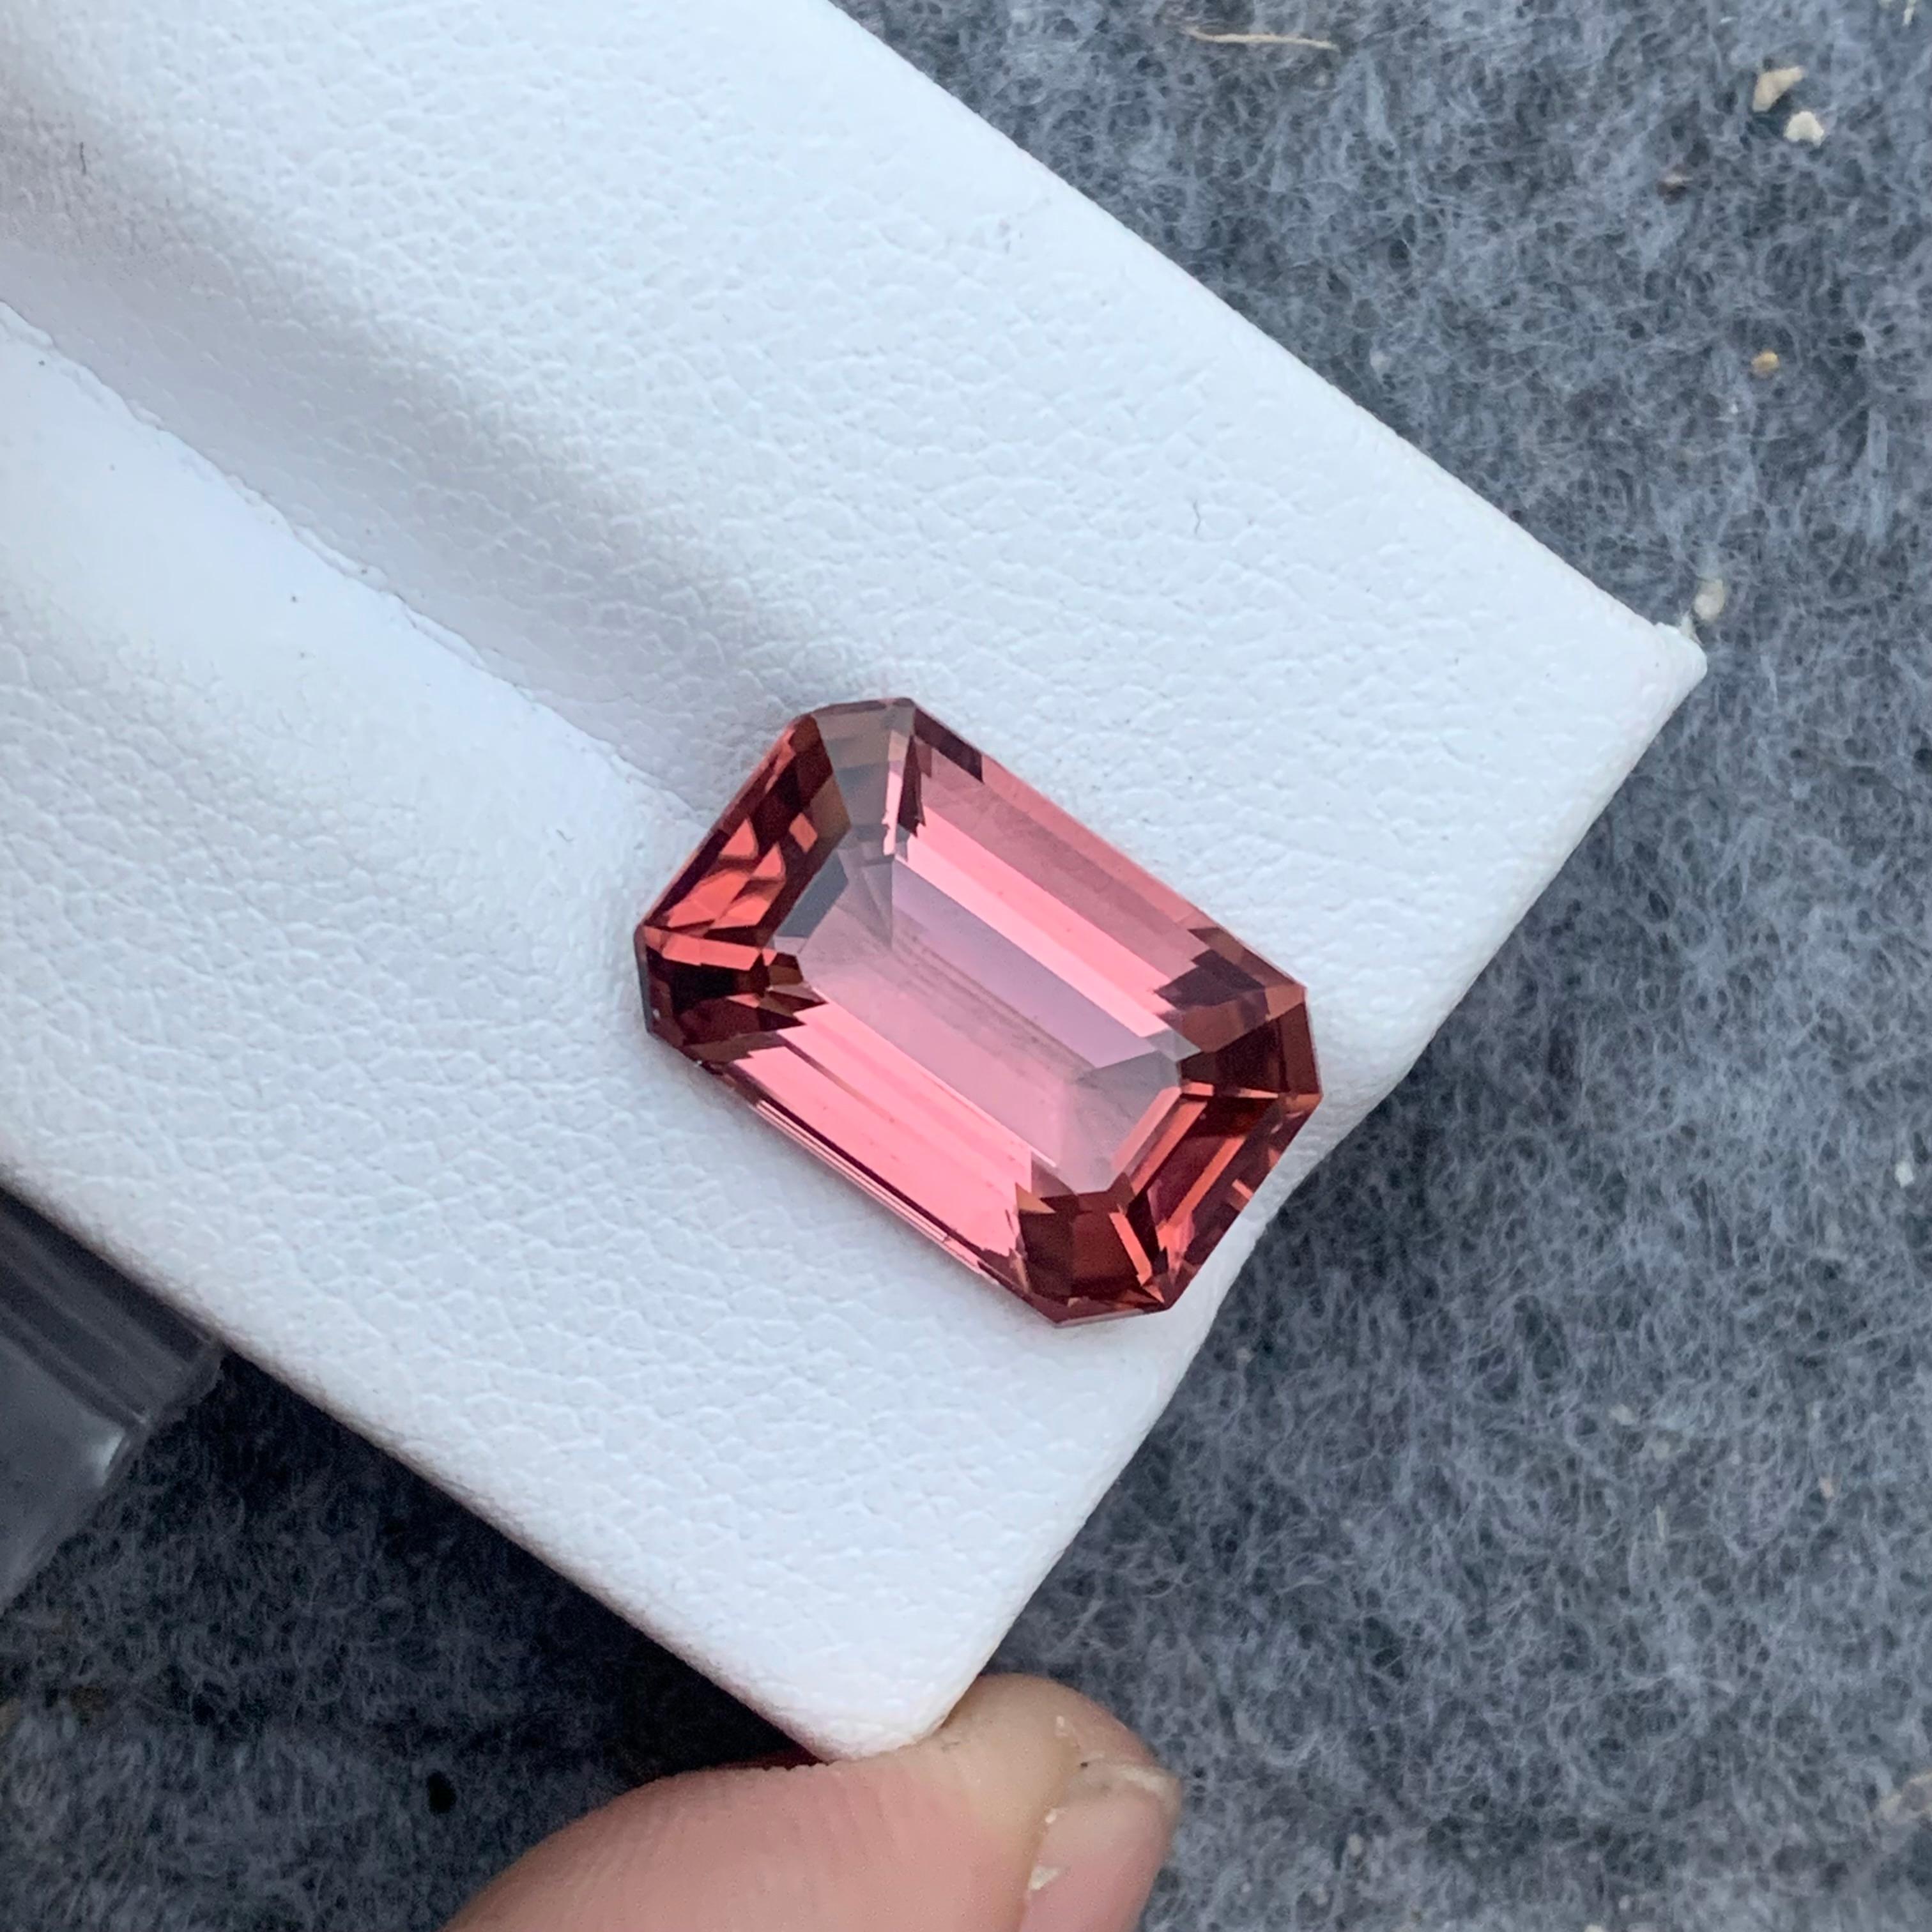 9.0 Carat AAA Quality Loose Soft Pink Tourmaline Emerald Cut From Afghanistan 9